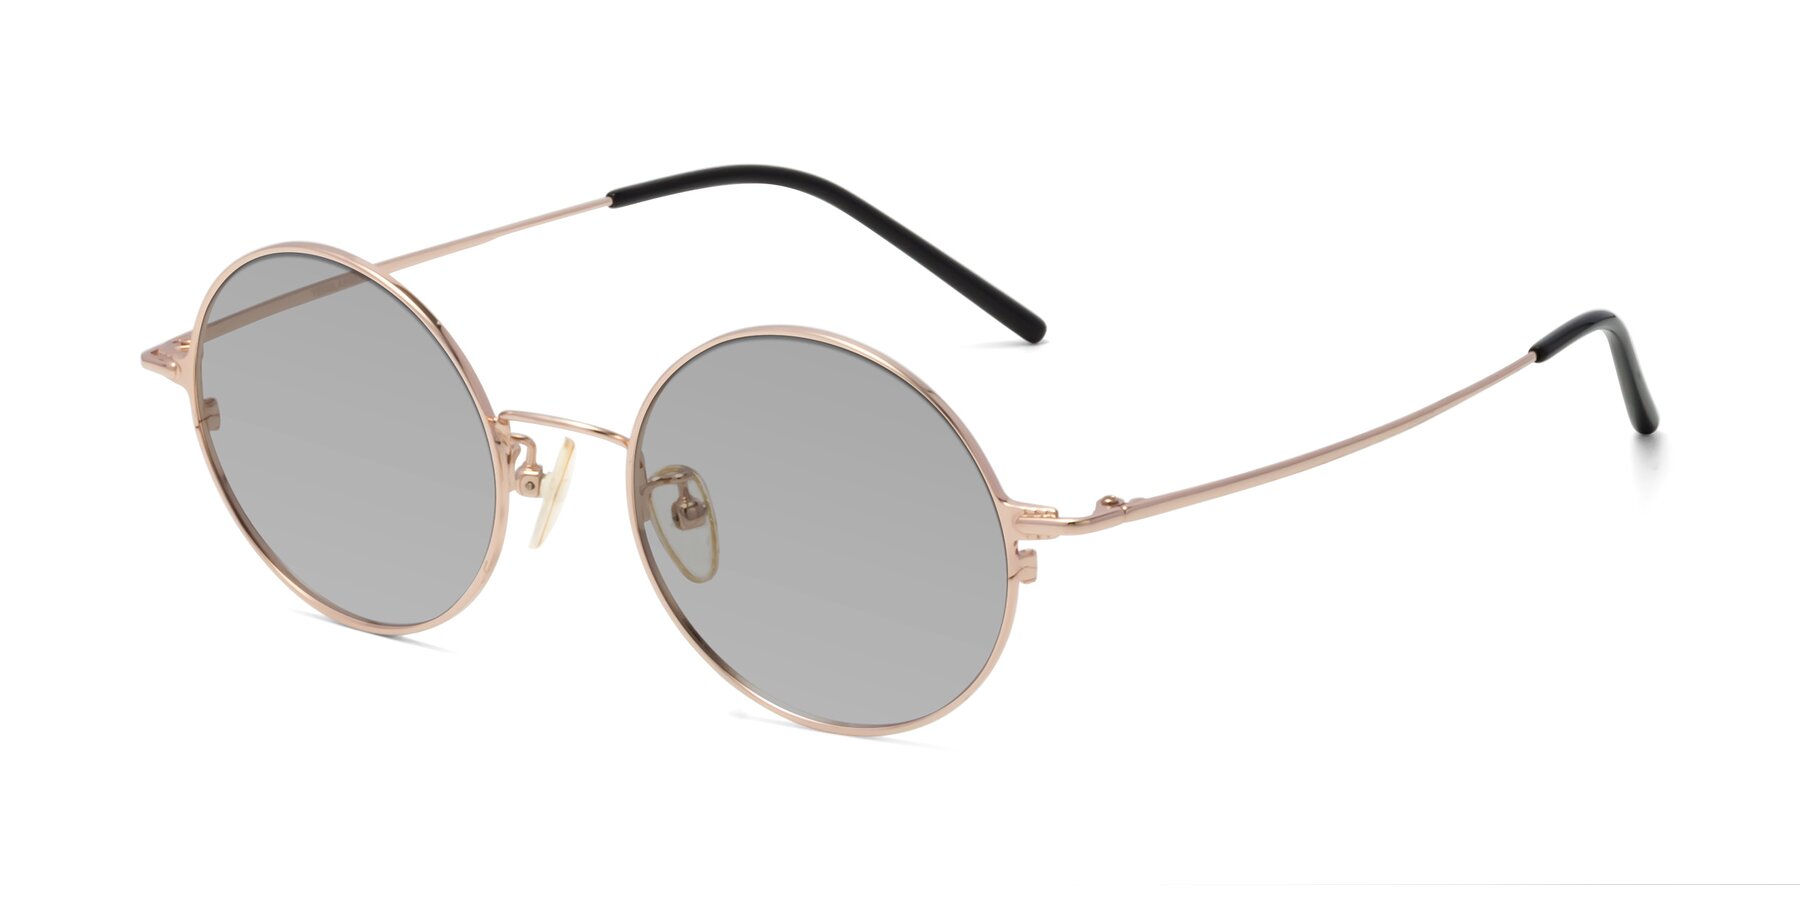 Angle of 18009 in Rose Gold with Light Gray Tinted Lenses